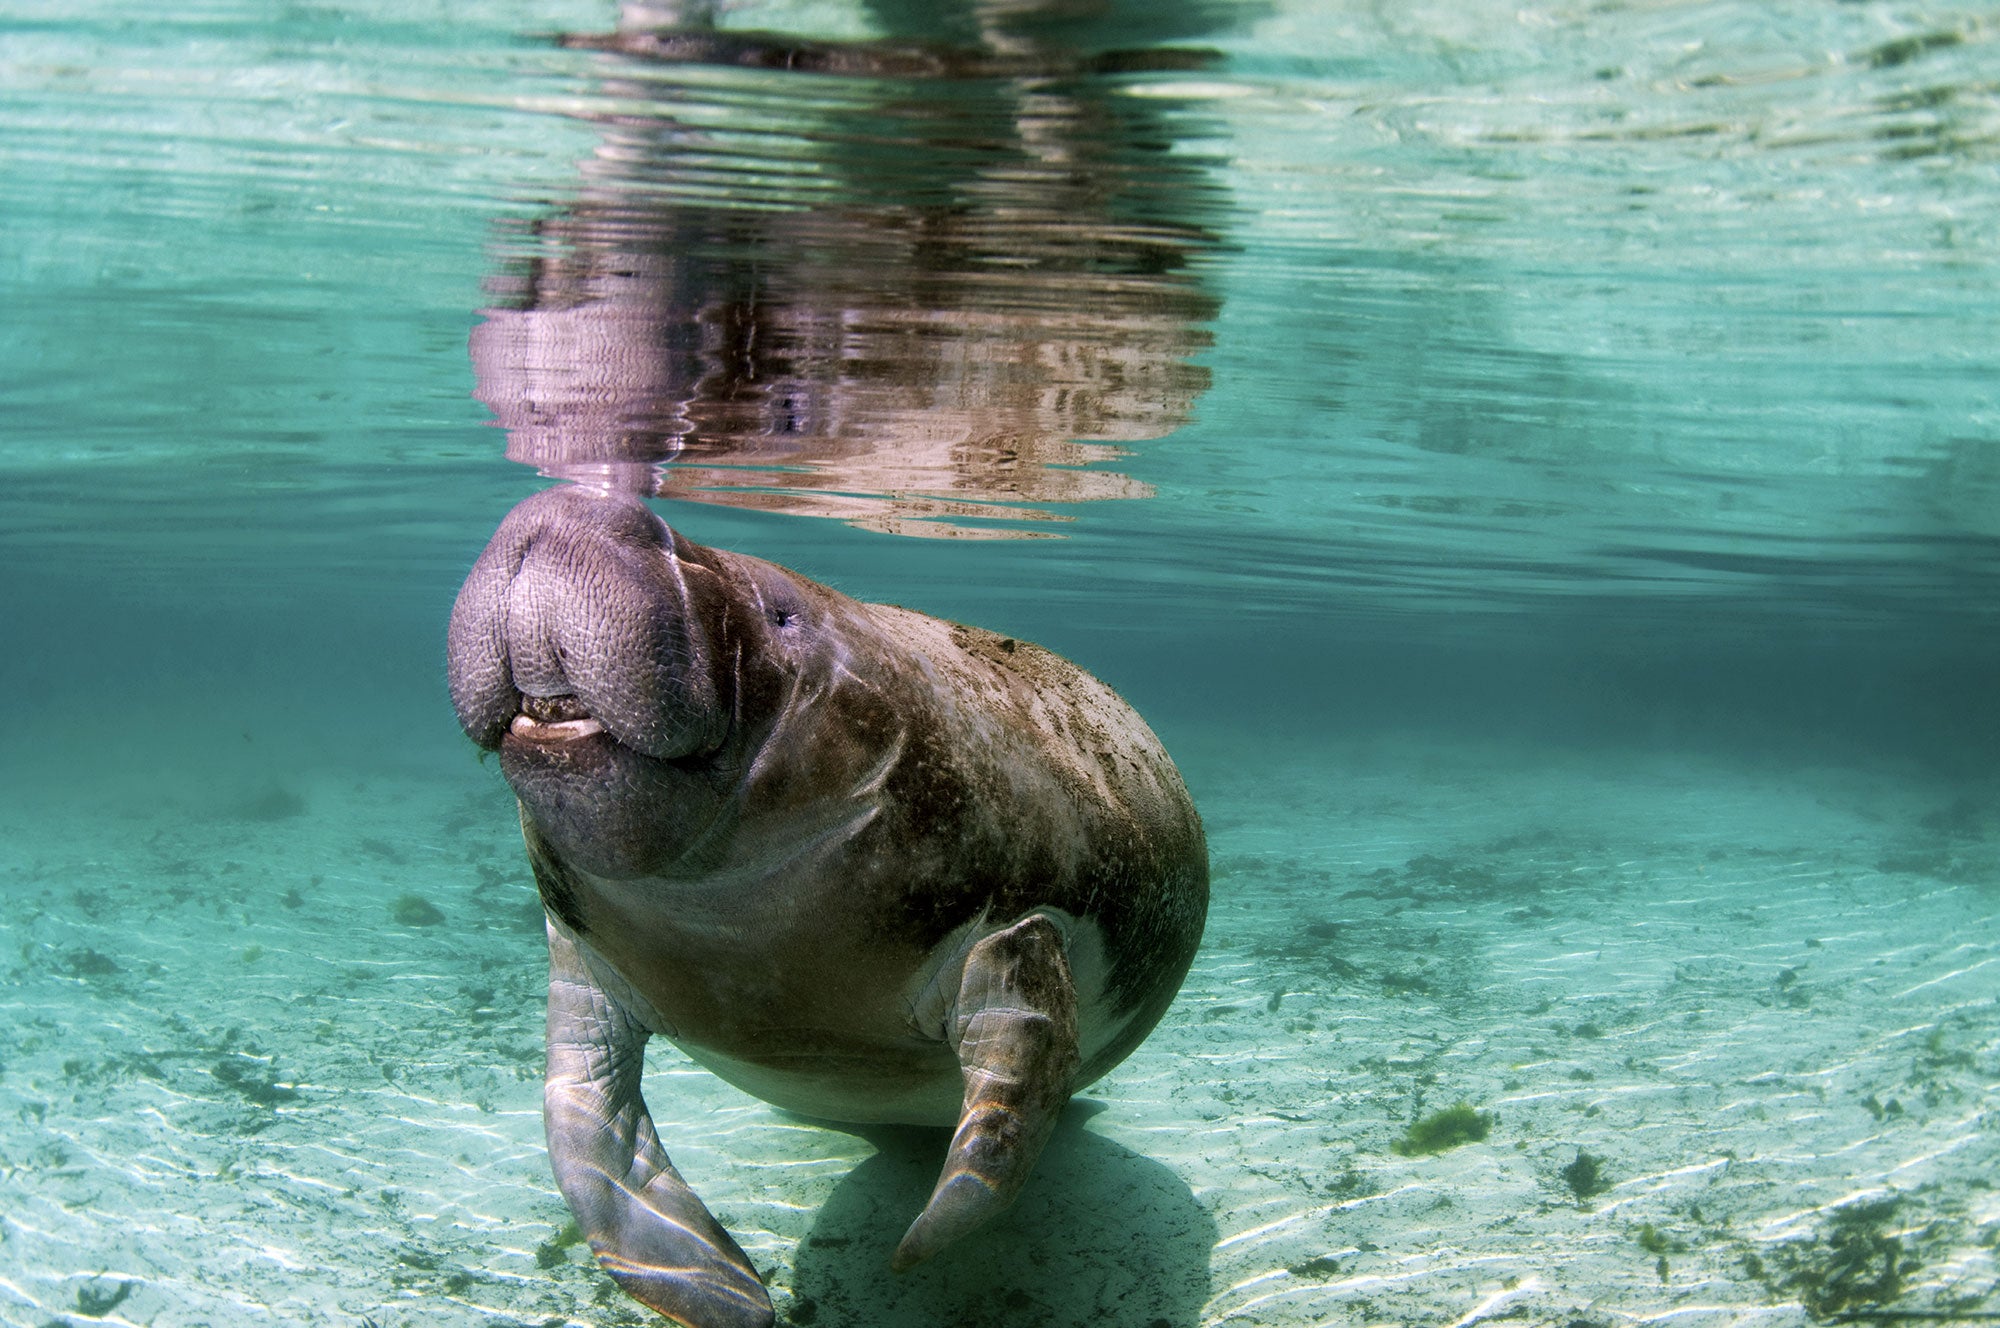 A manatee swims in Florida’s Crystal River.